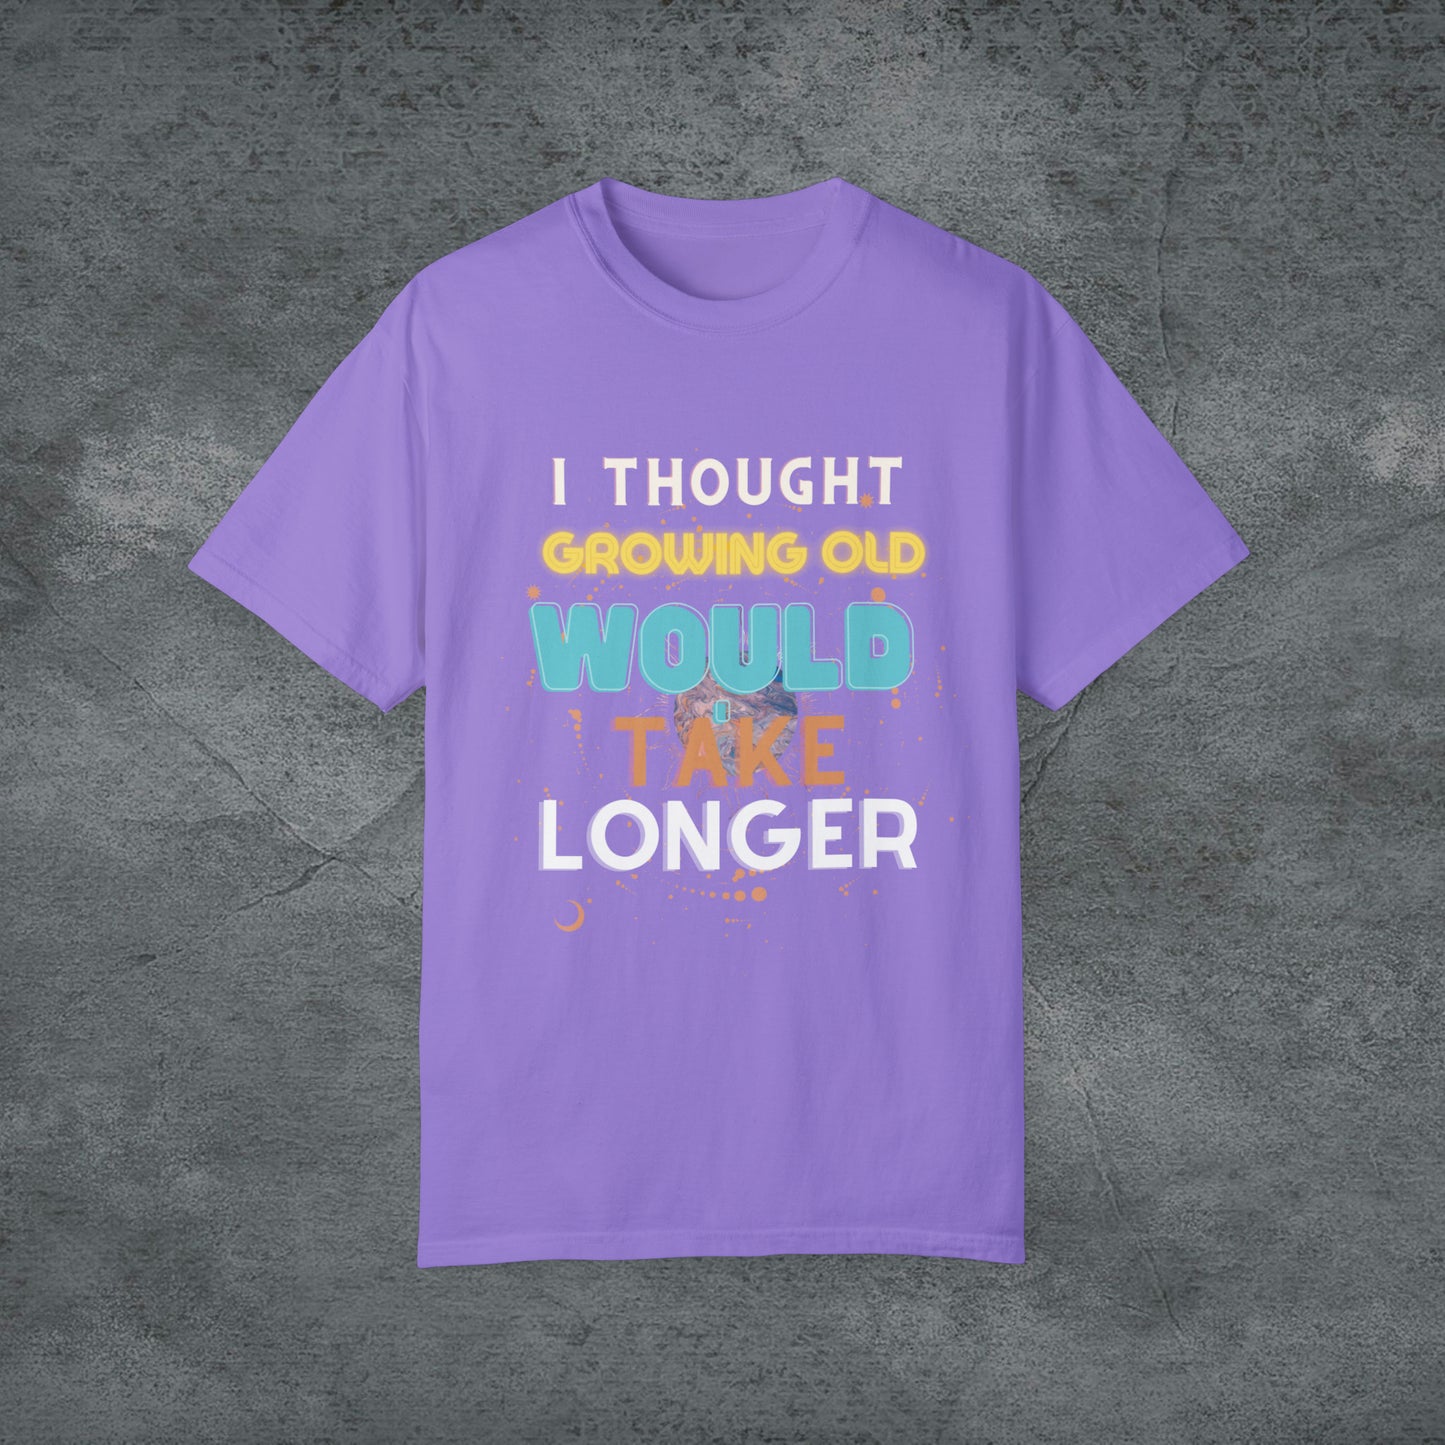 I Thought Growing Old Would Take Longer T-Shirt | Getting Older T Shirt | Funny Adulting T-Shirt | Old Age T Shirt | Old Person T Shirt T-Shirt Violet S 